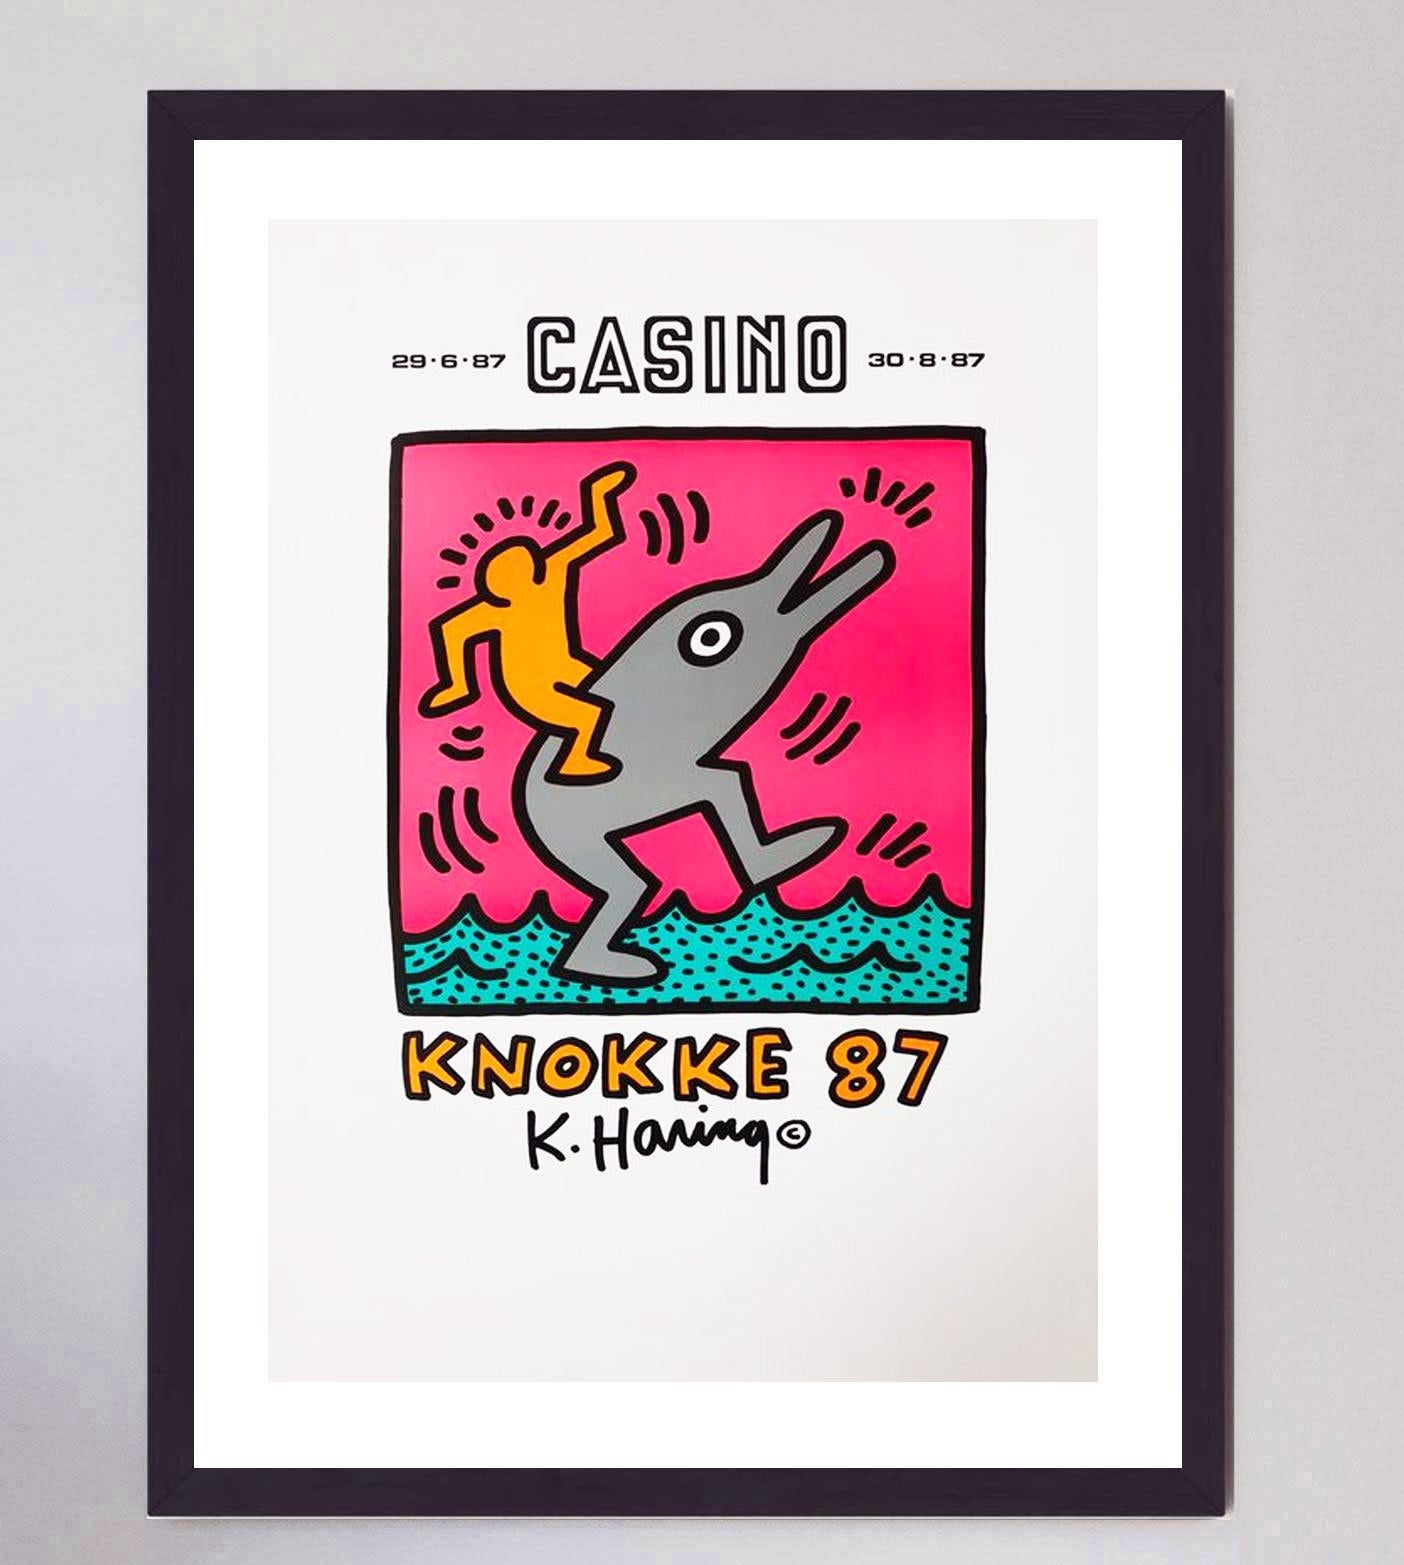 Produced to promote his solo exhibition at the Casino Knokke in Belgium, this beautiful offset lithograph from Keith Haring is printed in 5 colours and features beautiful original artwork. The exhibition ran as dated on the poster from 29th June to